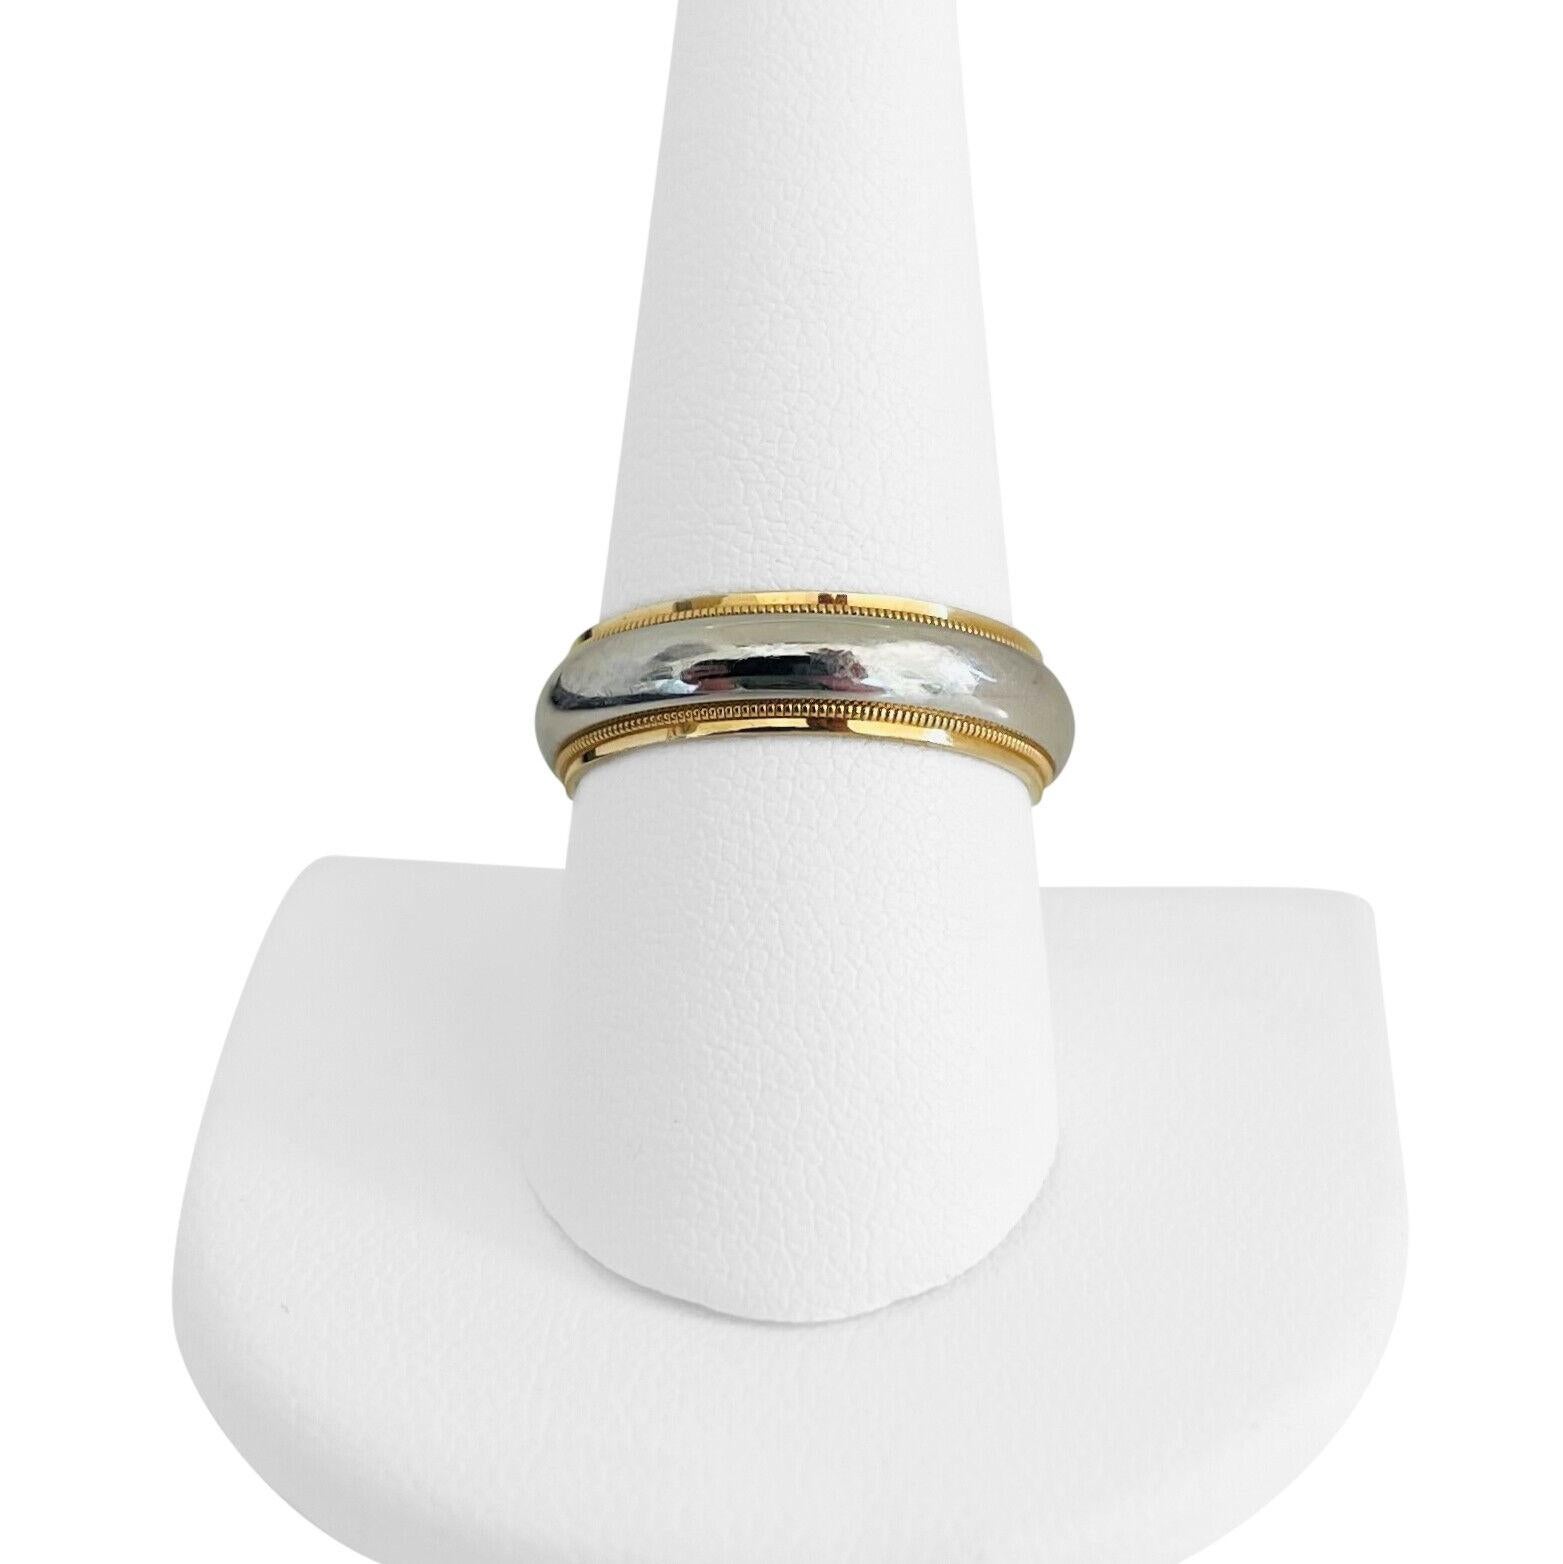 Tiffany & Co. 18k Yellow Gold & Platinum 6mm Wedding Band Ring Size 9.5 with Box

Condition:  Excellent Condition, Professionally Cleaned and Polished
Metal:  18k Gold and Platinum 950 (Marked, and Professionally Tested)
Weight:  10.7g
Width: 